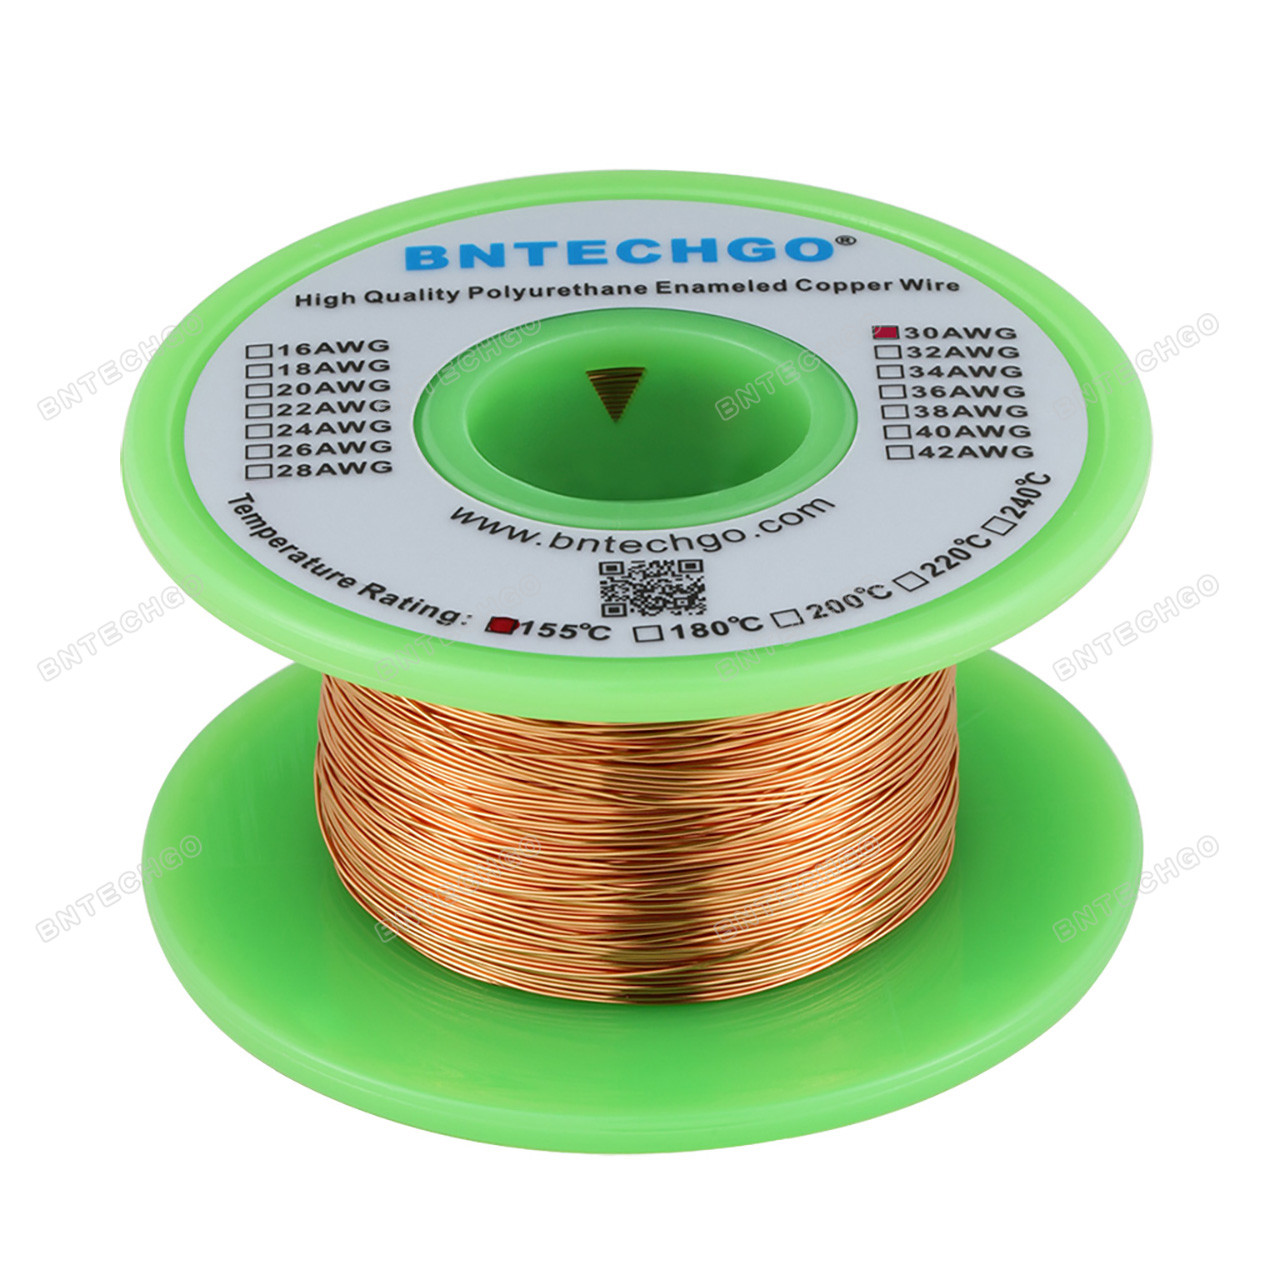 BNTECHGO 30 AWG Magnet Wire - Enameled Copper Wire - Enameled Magnet  Winding Wire - 3.0 lb - 0.0098 Diameter 1 Spool Coil Natural Temperature  Rating